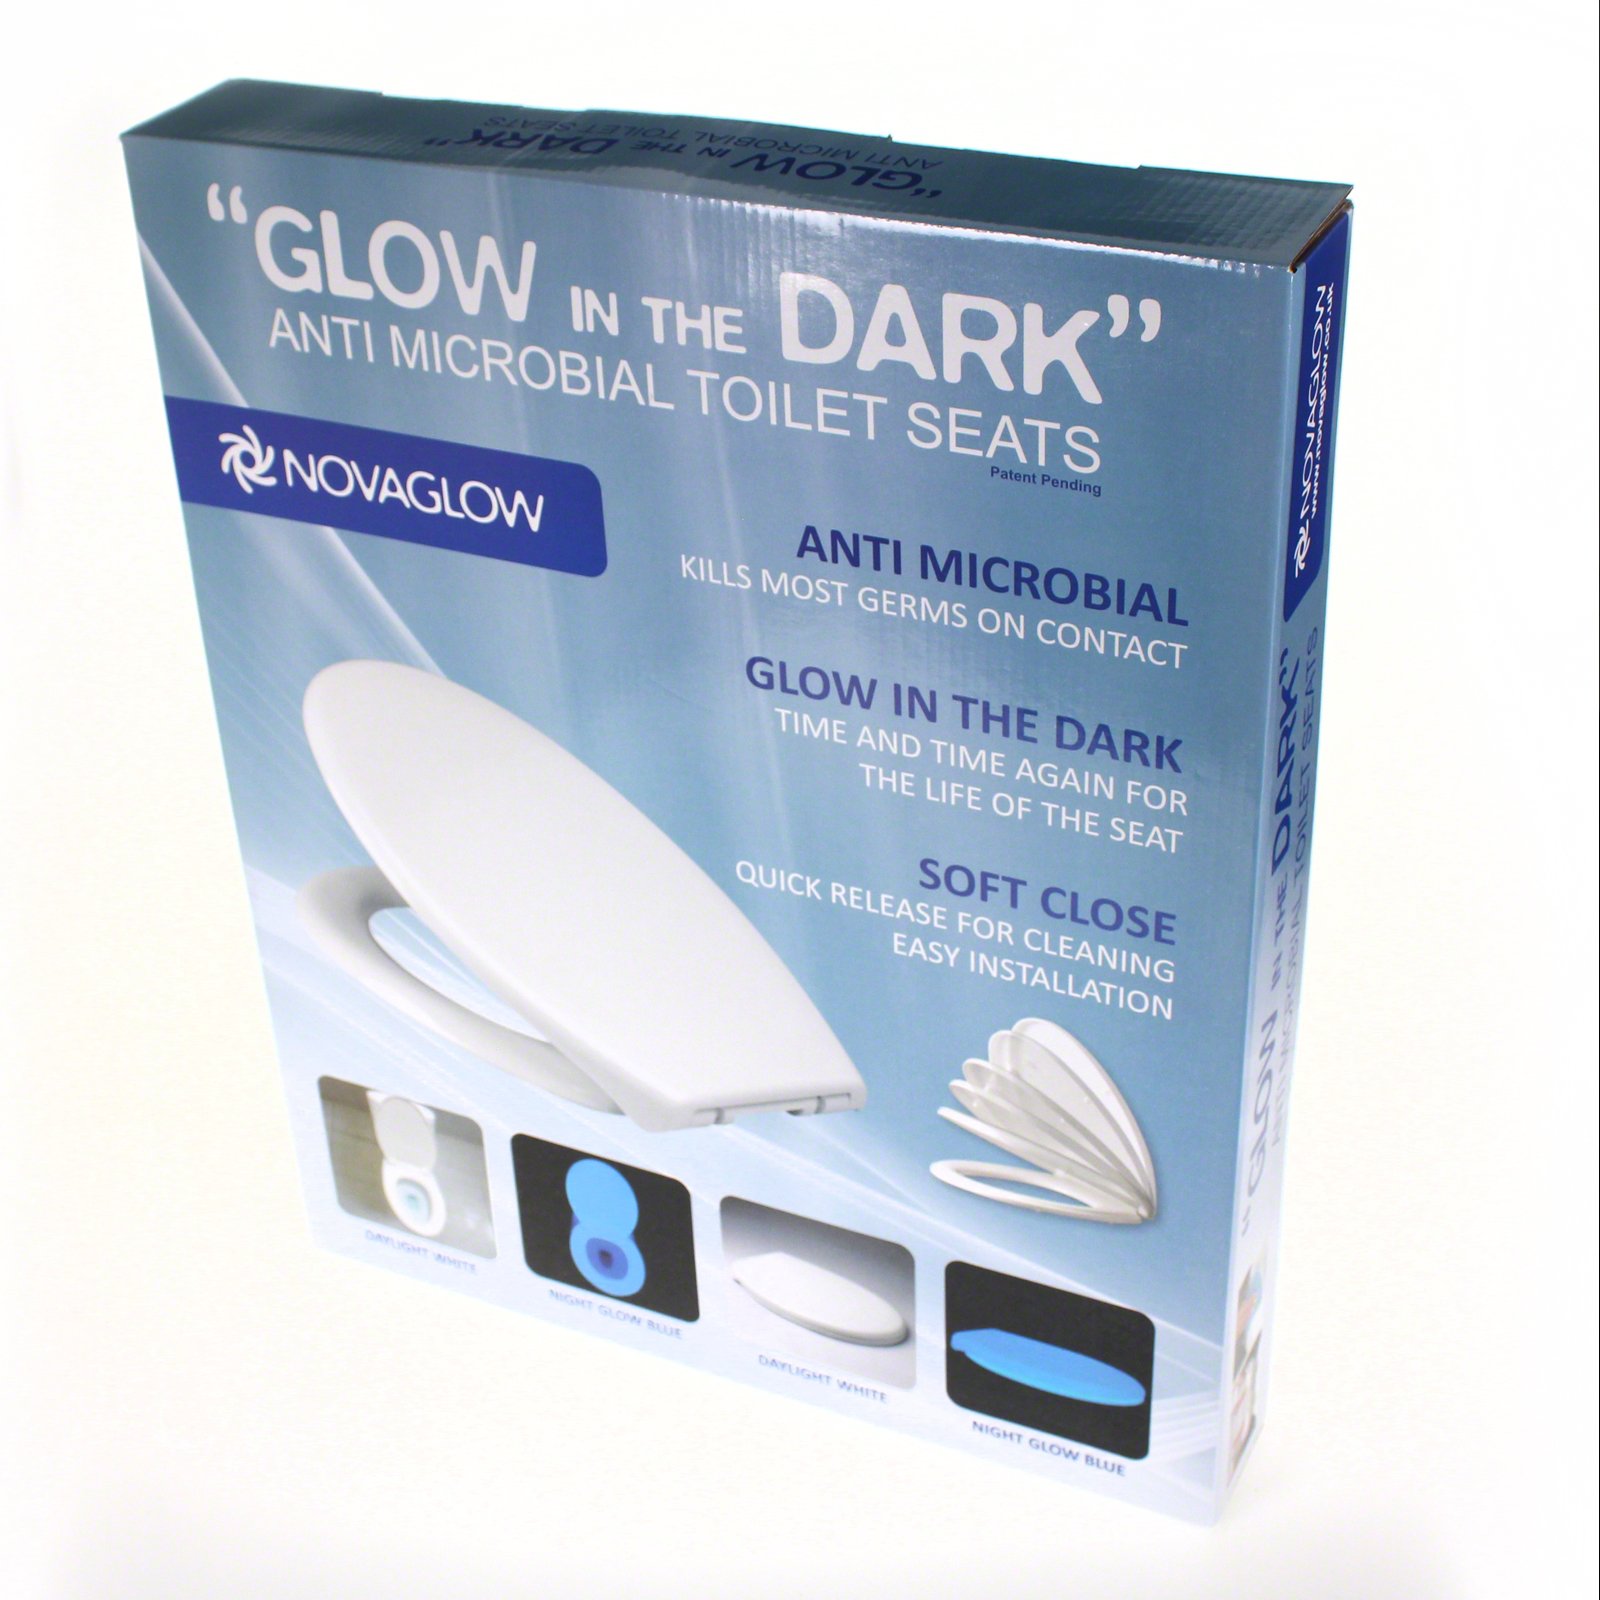 BLUE GLOW in the dark toilet seat incorp. antimicrobial coating, heavy  polymer